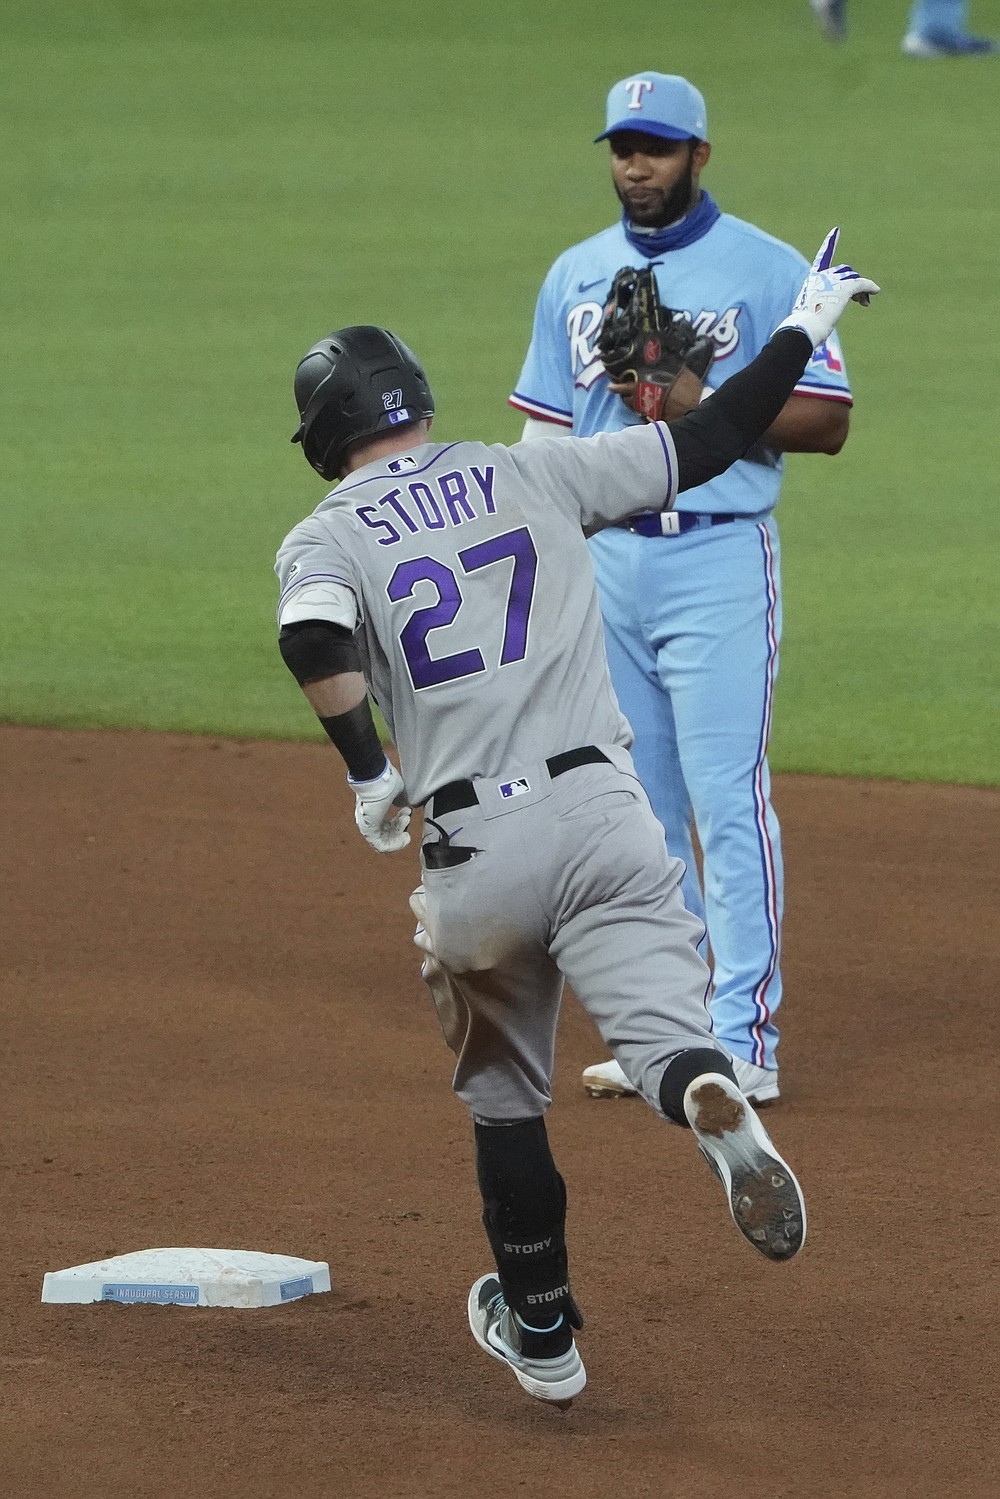 Colorado Rockies' Trevor Story (27) rounds second base past Texas Rangers shortstop Elvis Andrus after hitting a home run in the fourth inning of a baseball game Sunday, July 26, 2020, in Arlington, Texas. (AP Photo/Louis DeLuca)